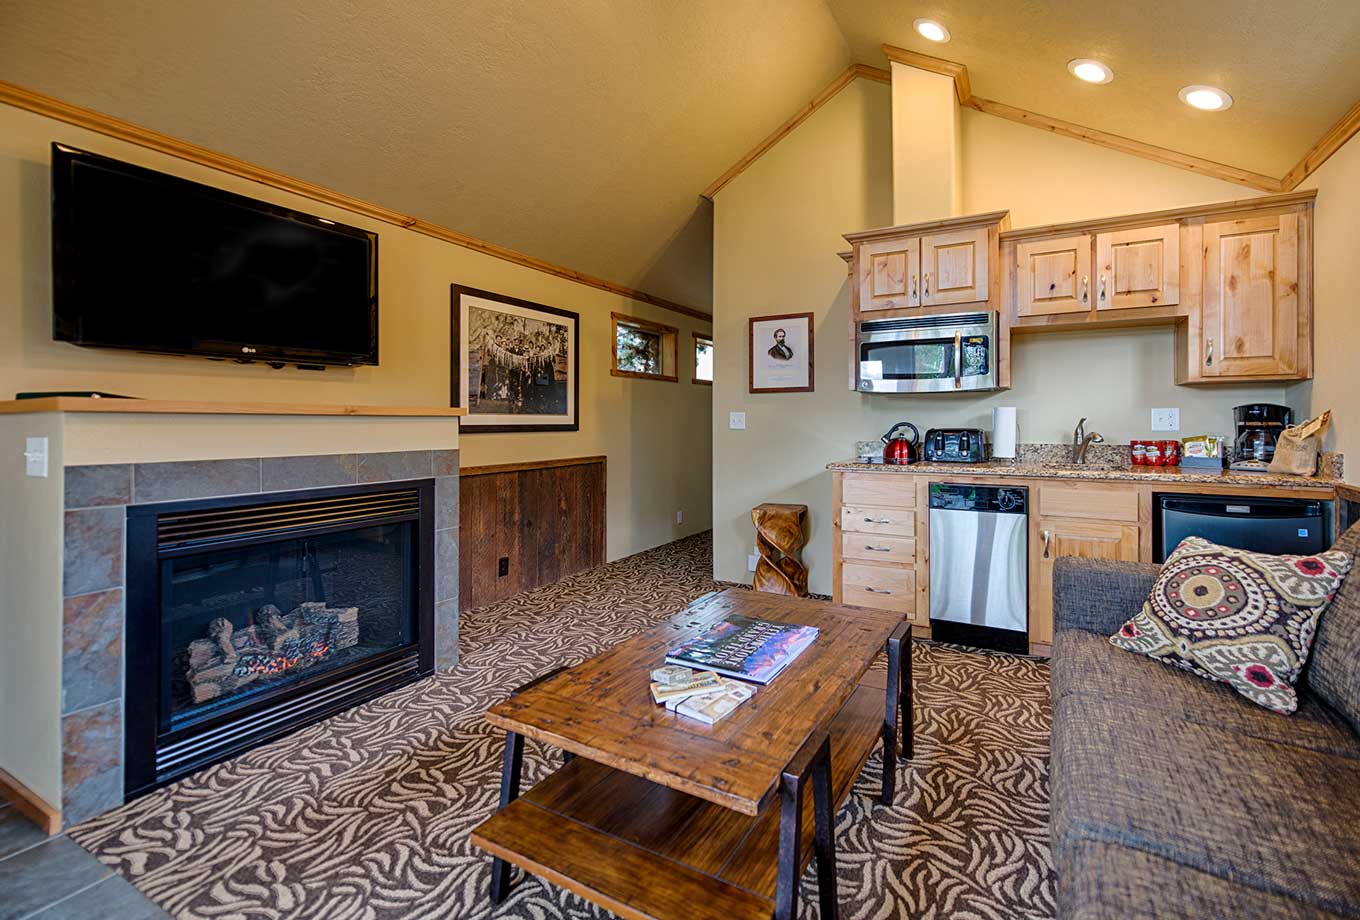 West Yellowstone Explorer Cabins kitchenette and living room